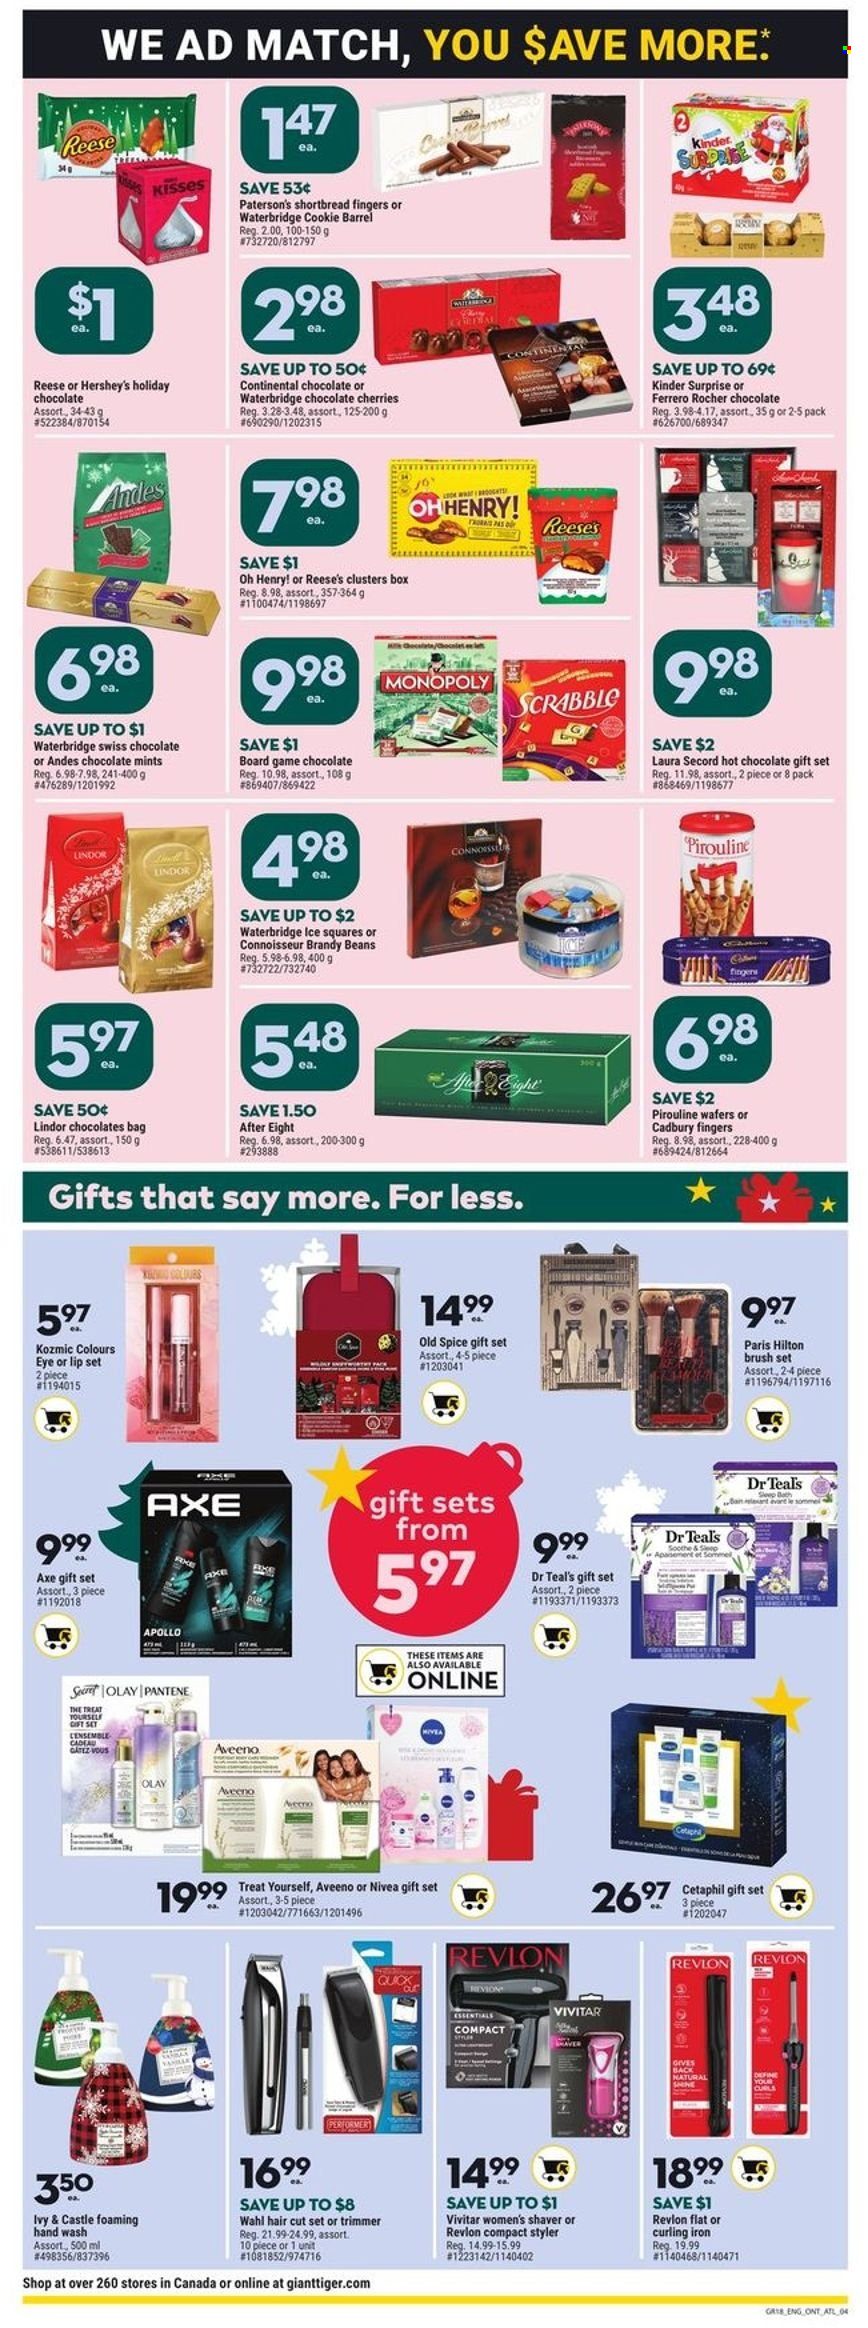 thumbnail - Giant Tiger Flyer - November 30, 2022 - December 06, 2022 - Sales products - beans, cherries, Continental, Reese's, Hershey's, gift set, wafers, Kinder Surprise, After Eight, Cadbury, spice, hot chocolate, brandy, Castle, Aveeno, Nivea, hand wash, brush set, Olay, Revlon, Axe, shaver, trimmer, brush, Vivitar, iron, curling iron, Monopoly, board game, Pantene, Old Spice, Lindor, Ferrero Rocher. Page 4.